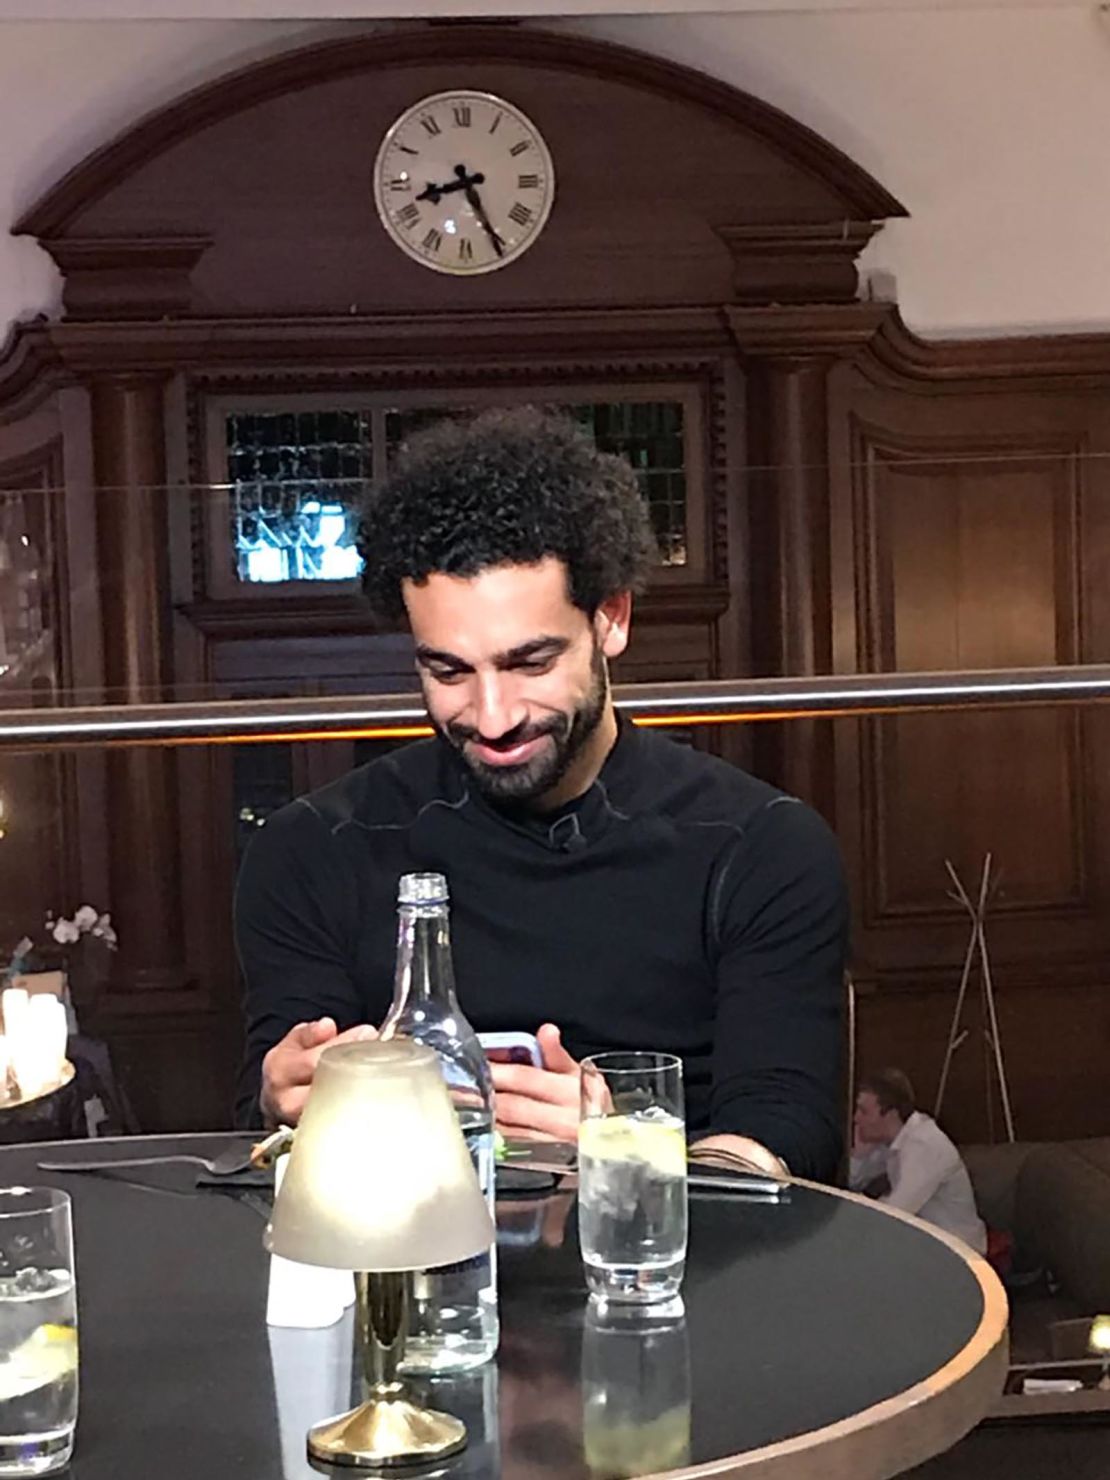 Salah watches a video message from his first coach back in Egypt while waiting for dinner.